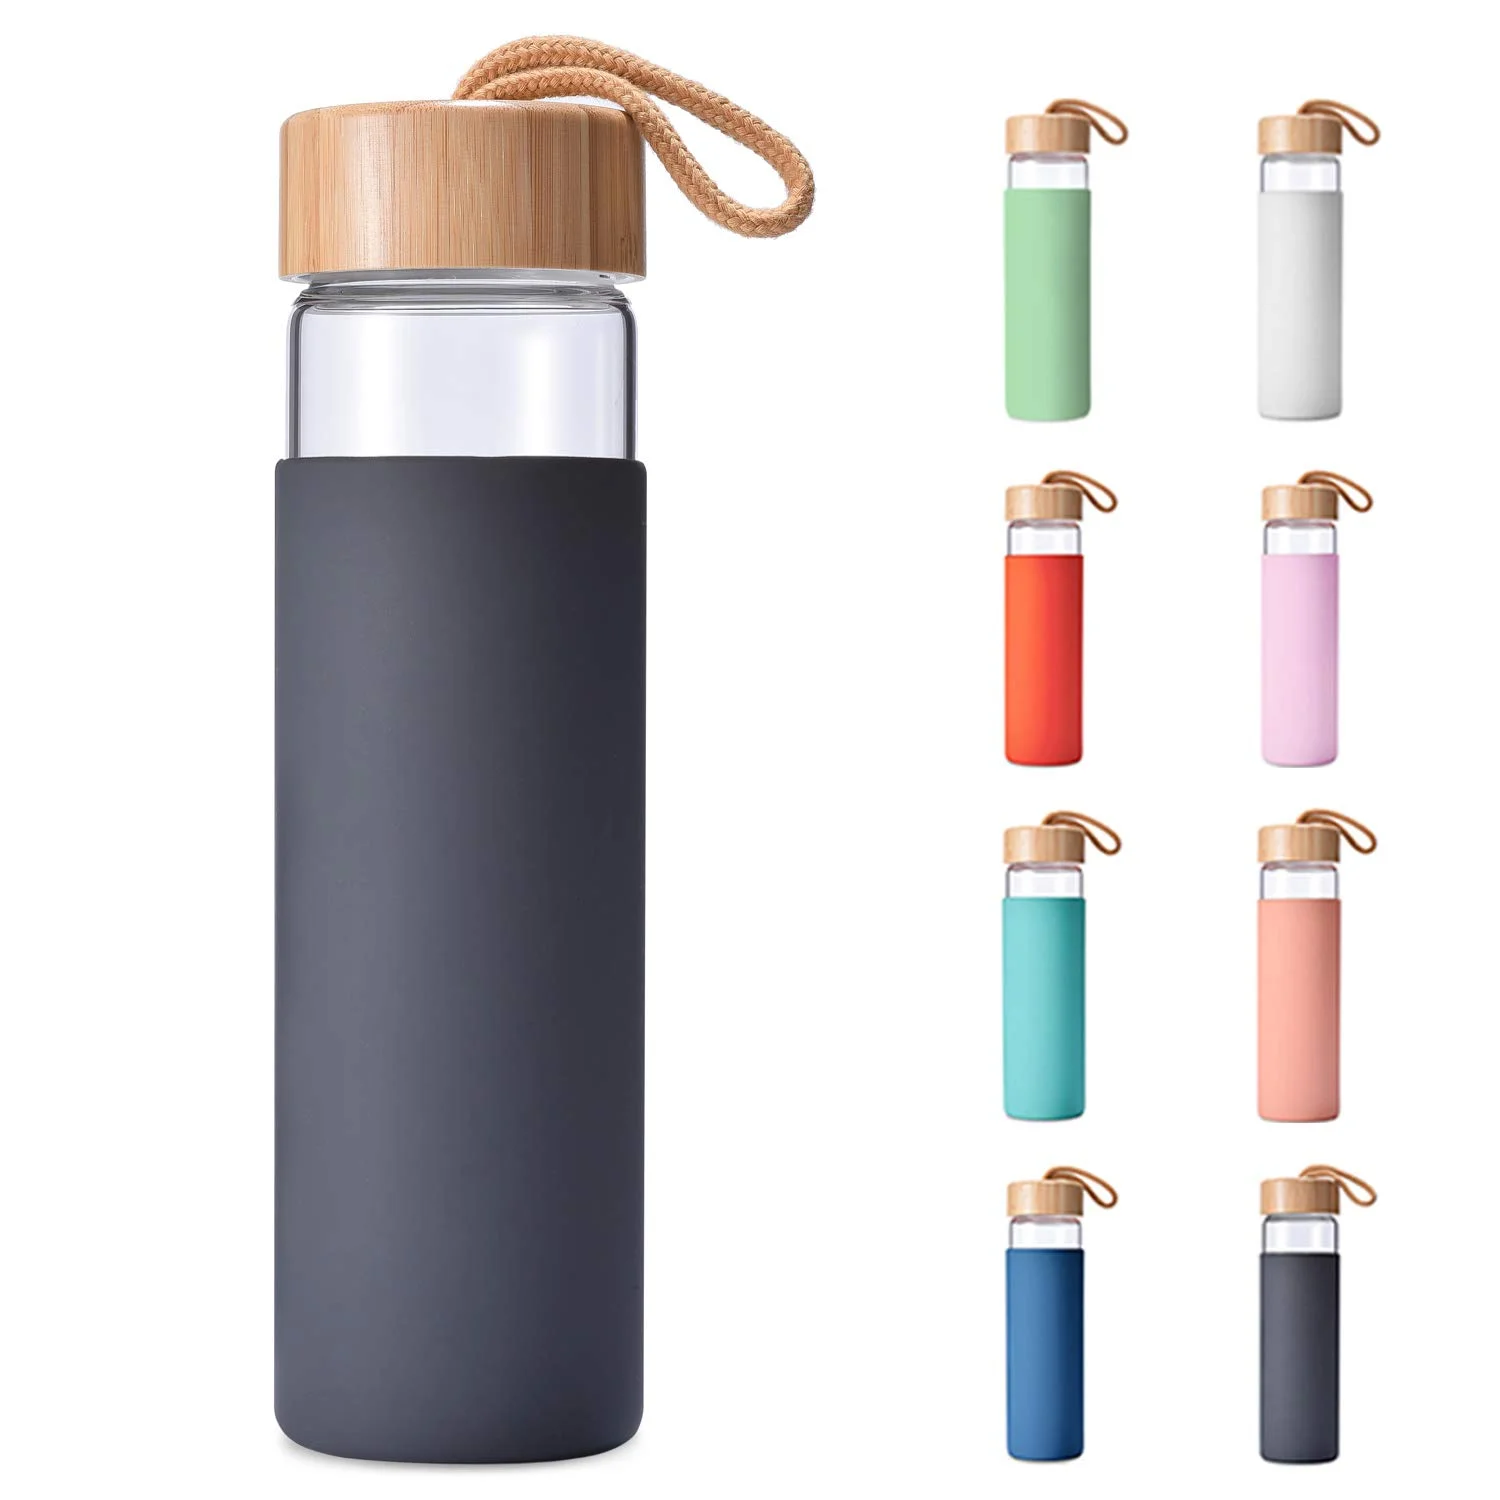 Neon Kactus - Hand Blown Borosilicate Glass Water Bottle with Bamboo Carry Handle Lid, Glass Bottles with Food-grade Silicone Sleeve, Plastic-Free